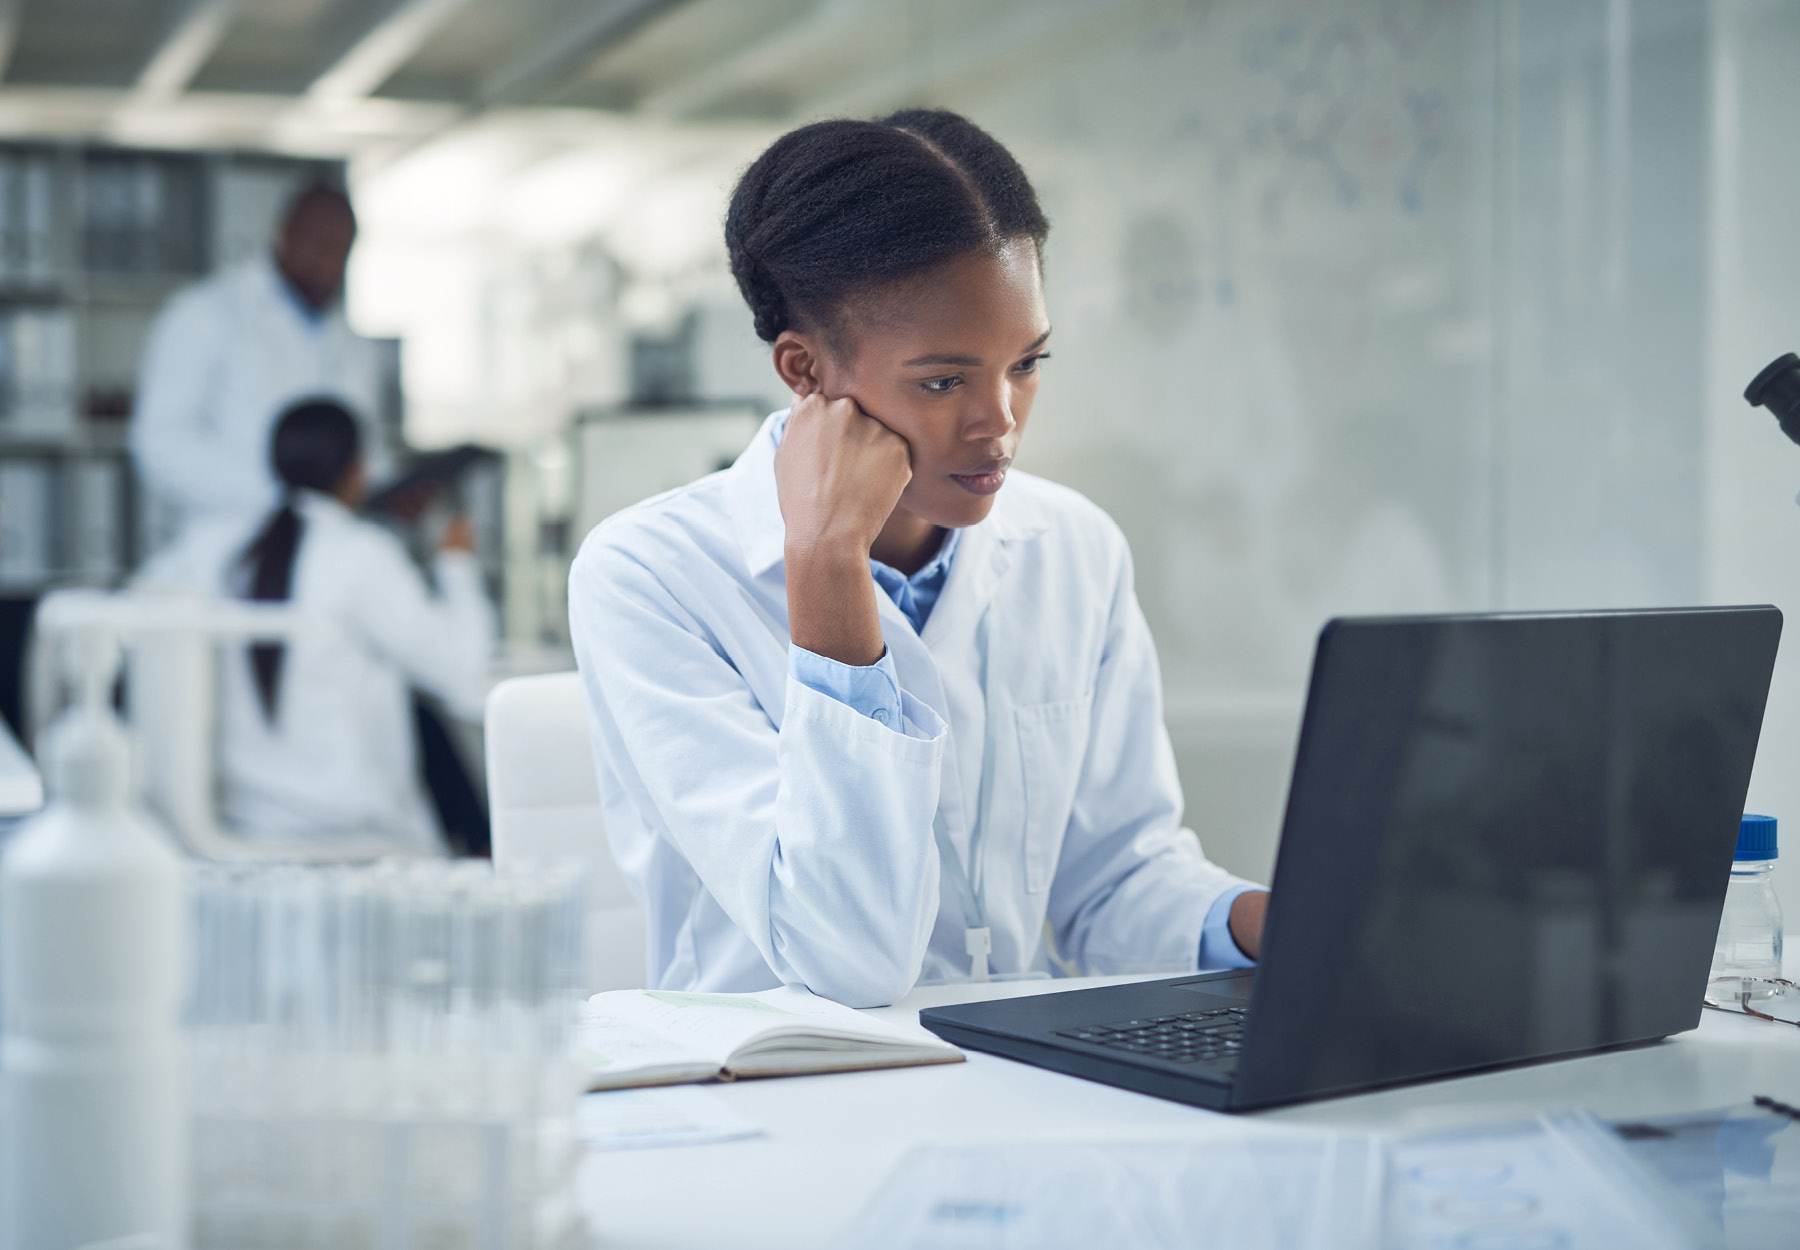 African American female lab employee looking at her laptop with a stressed expression. Stock photo.